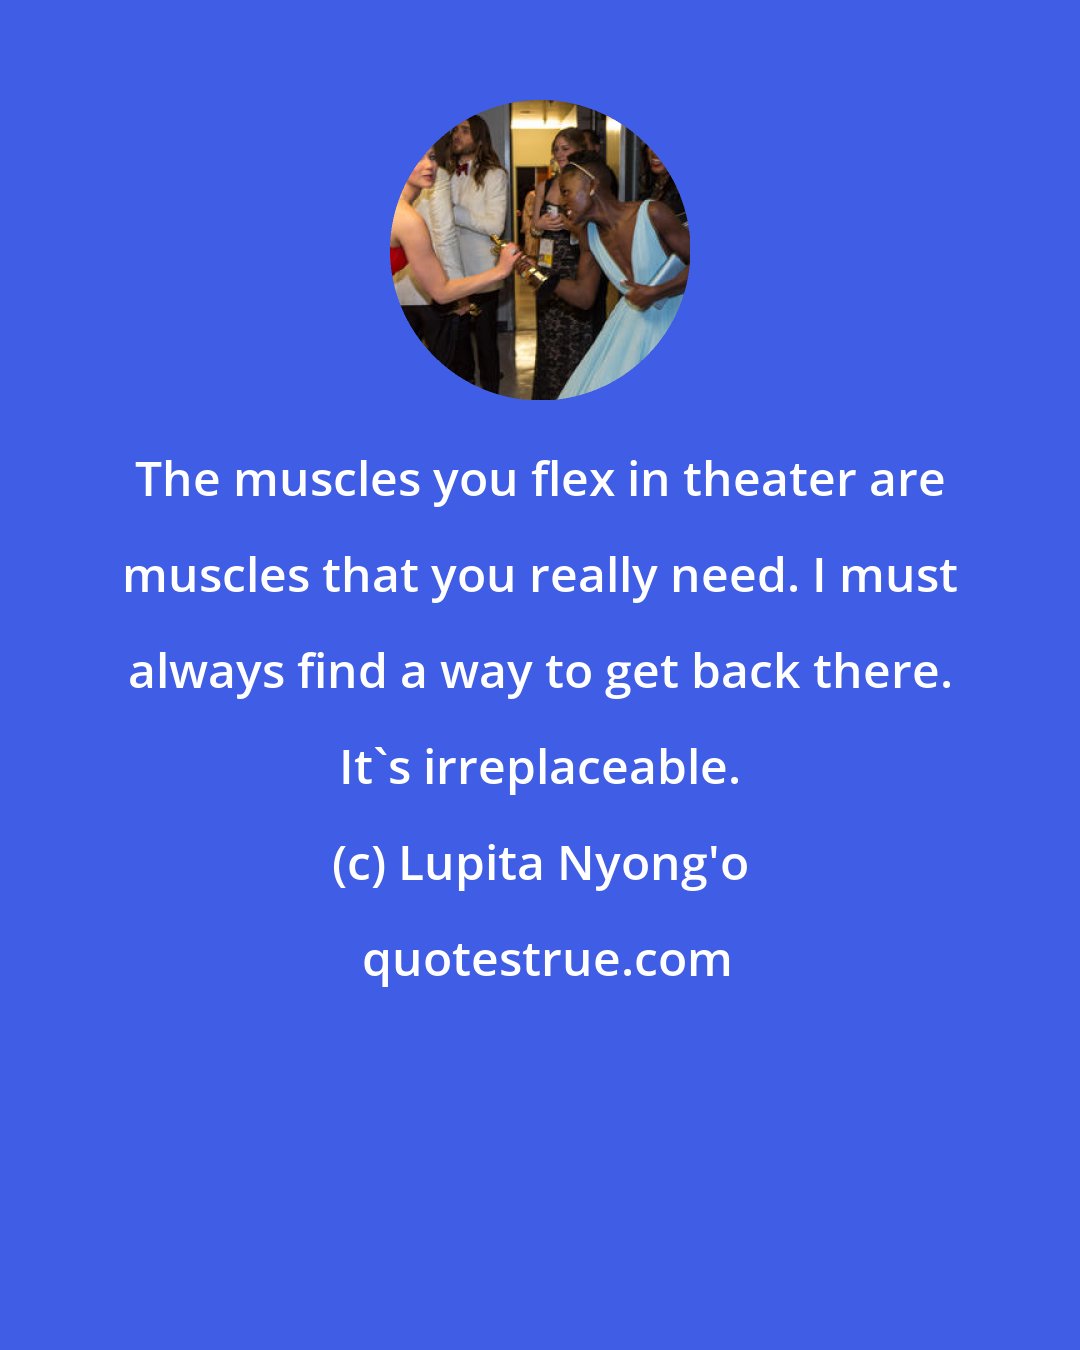 Lupita Nyong'o: The muscles you flex in theater are muscles that you really need. I must always find a way to get back there. It's irreplaceable.